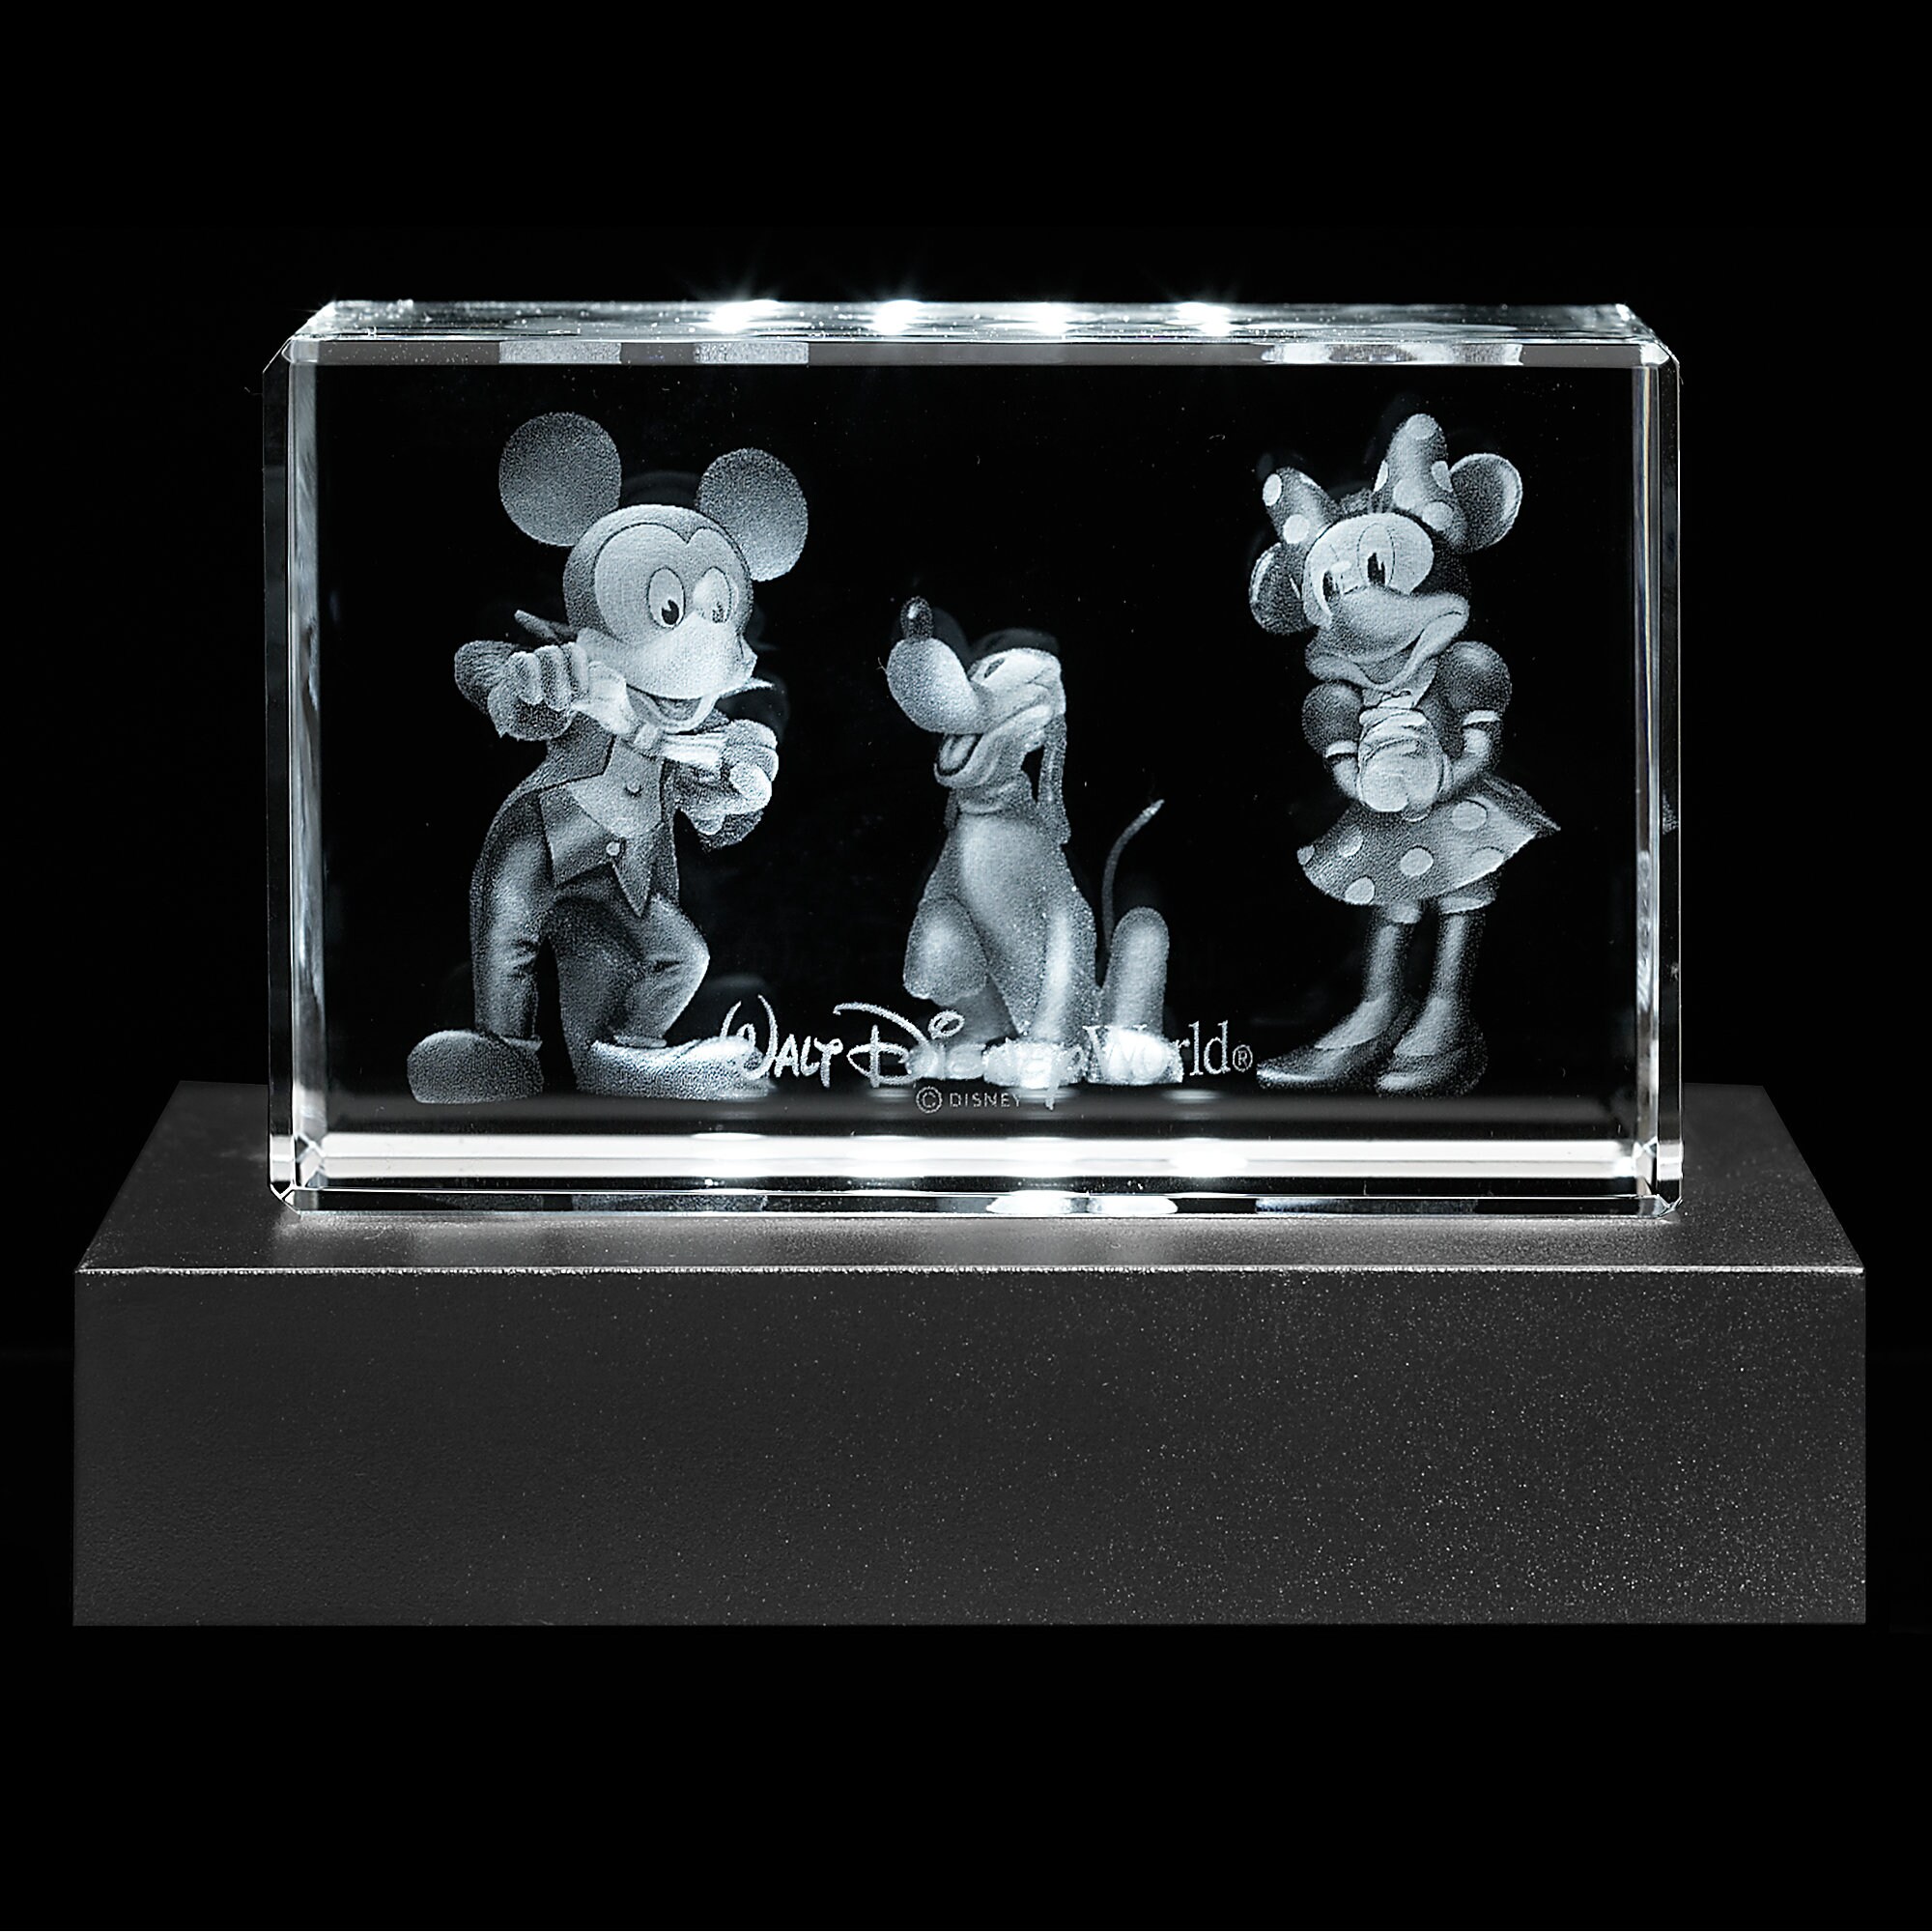 Mickey and Minnie Mouse, and Pluto Laser Cube by Arribas - Walt Disney World